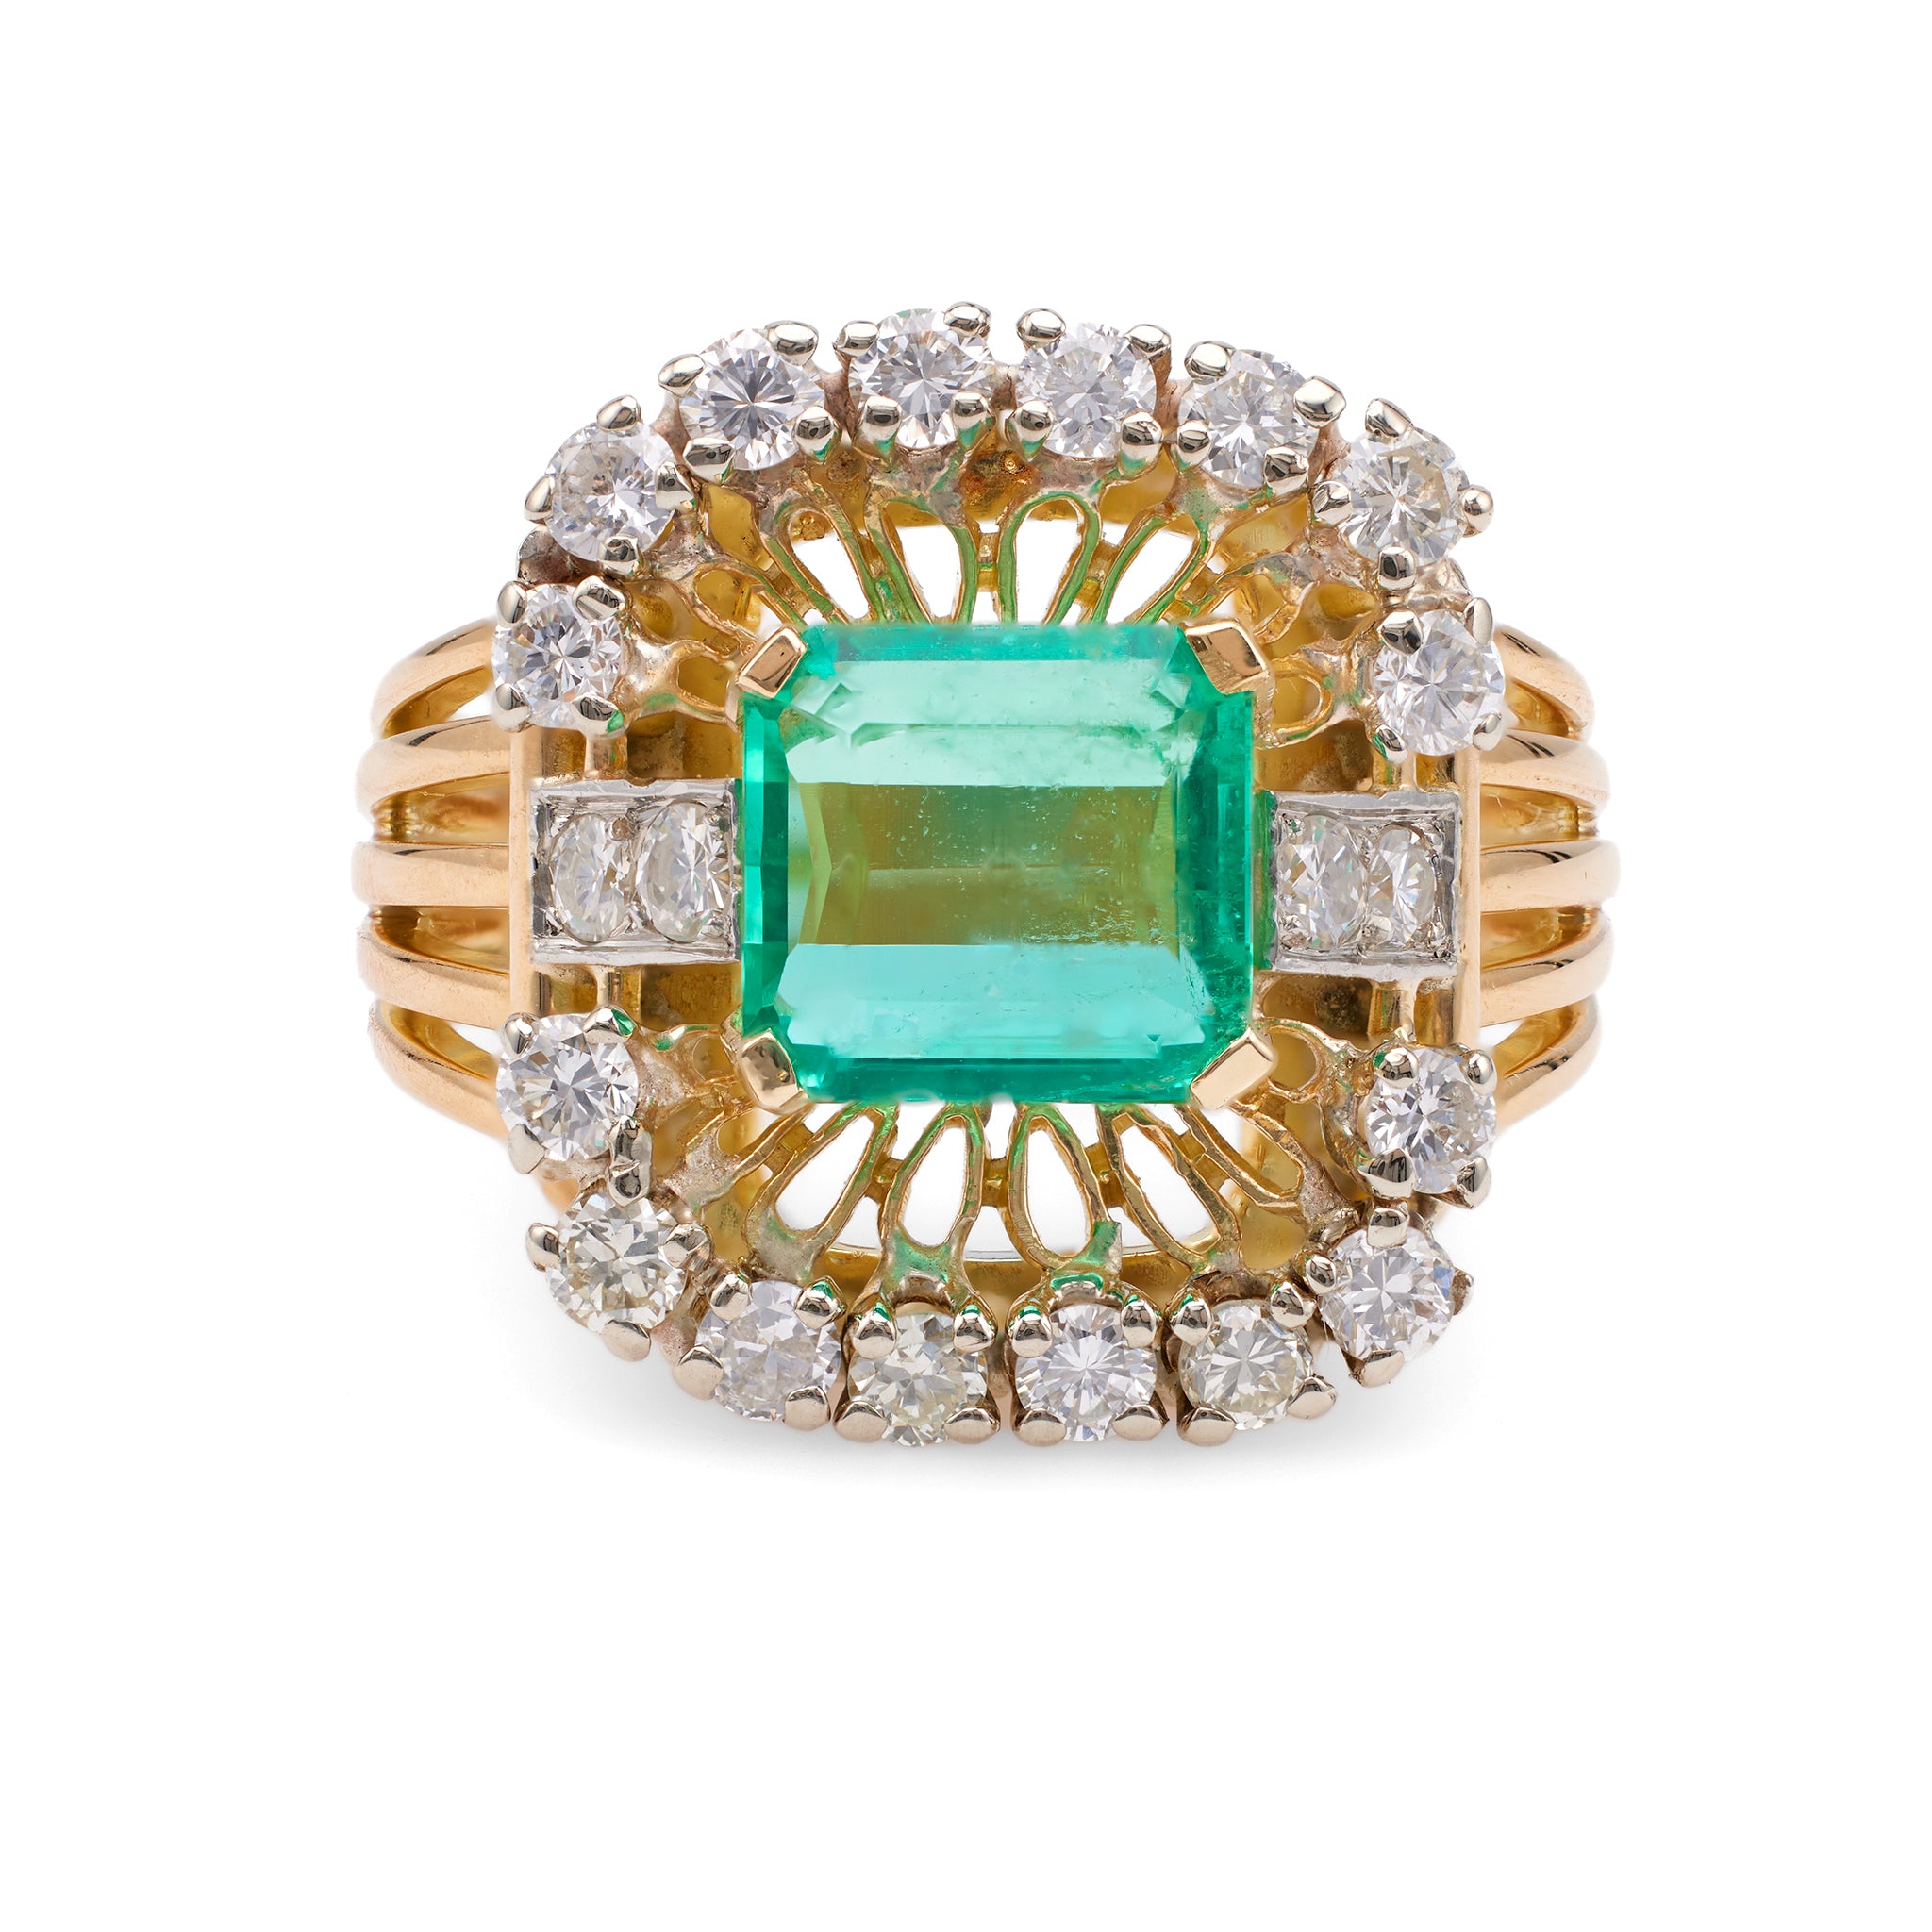 Retro French GIA 2.68 Carat Colombian Emerald Diamond 18k Yellow Gold Cocktail Ring